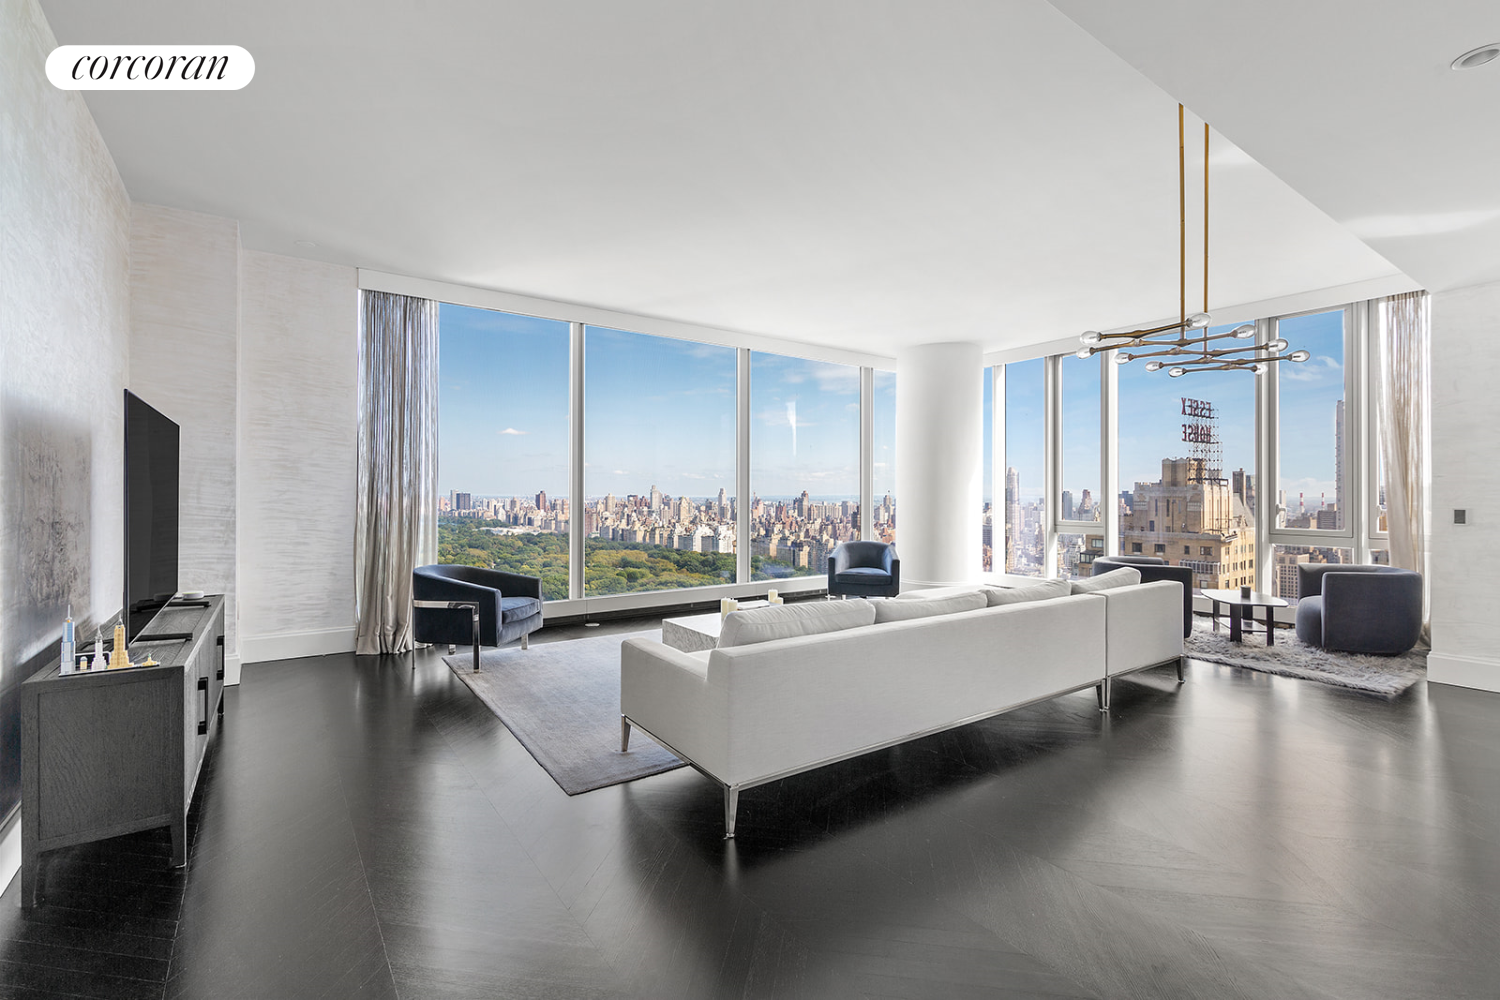 217 West 57th Street 43C, Central Park South, Midtown West, NYC - 3 Bedrooms  
3.5 Bathrooms  
5 Rooms - 